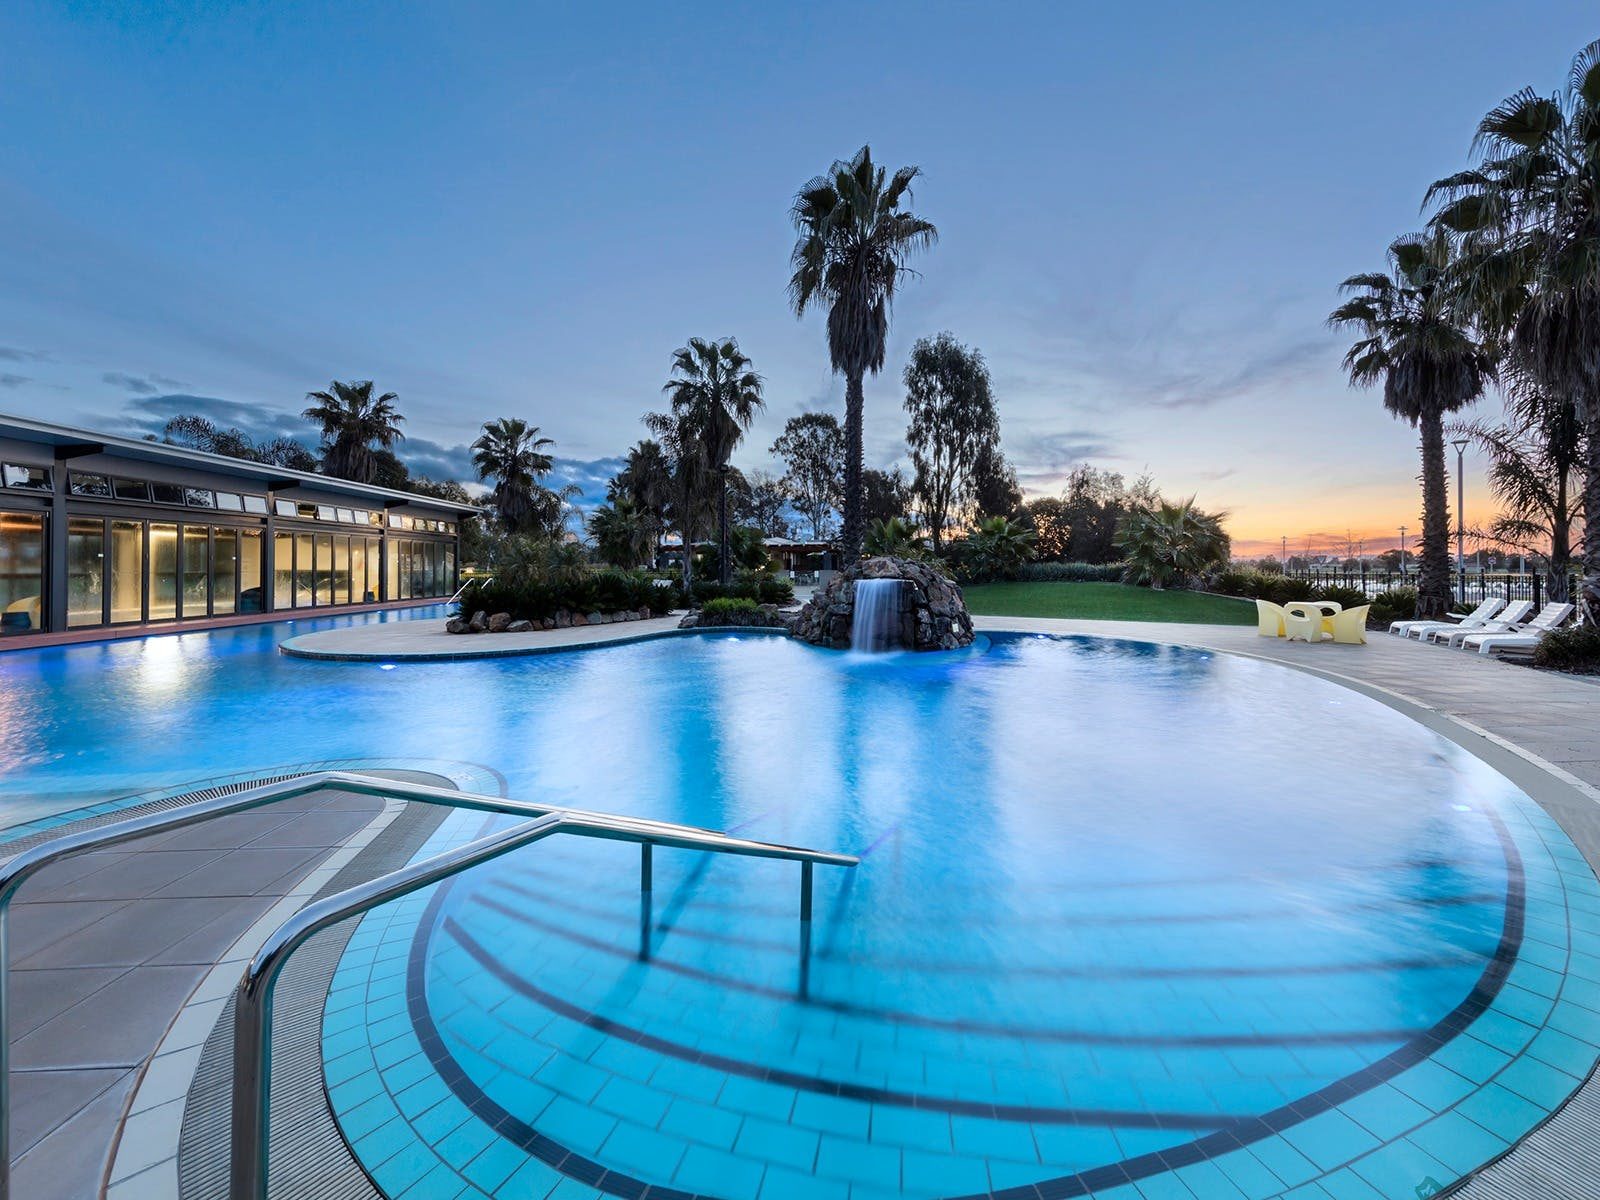 Landscape photograph of the outdoor pool at RACV Cobram Resort